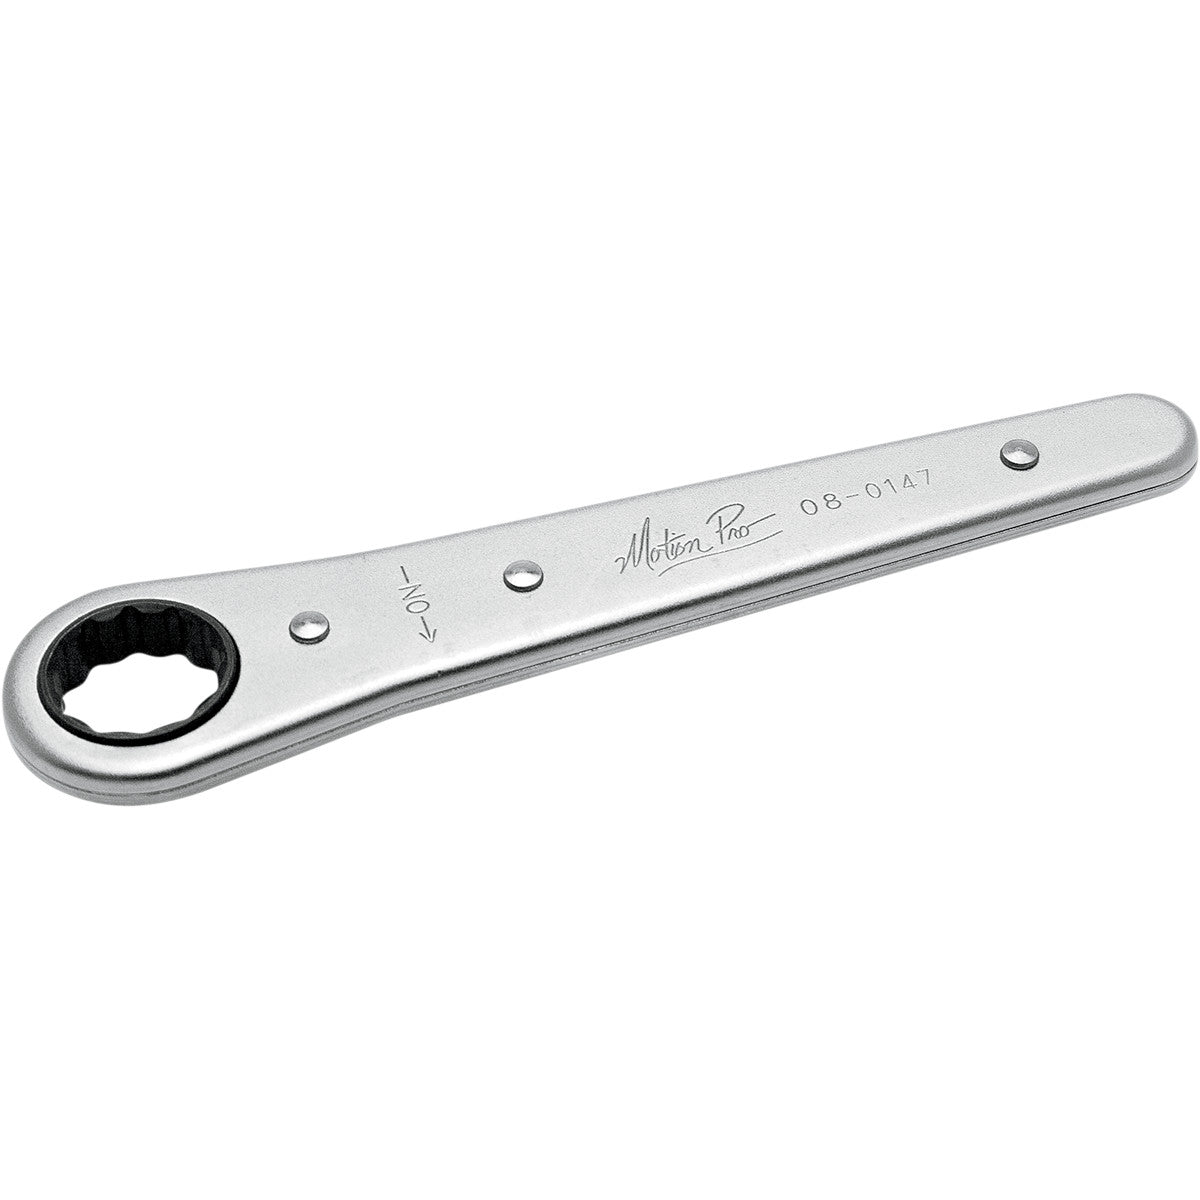 Motion Pro spark plug wrench 2T lock